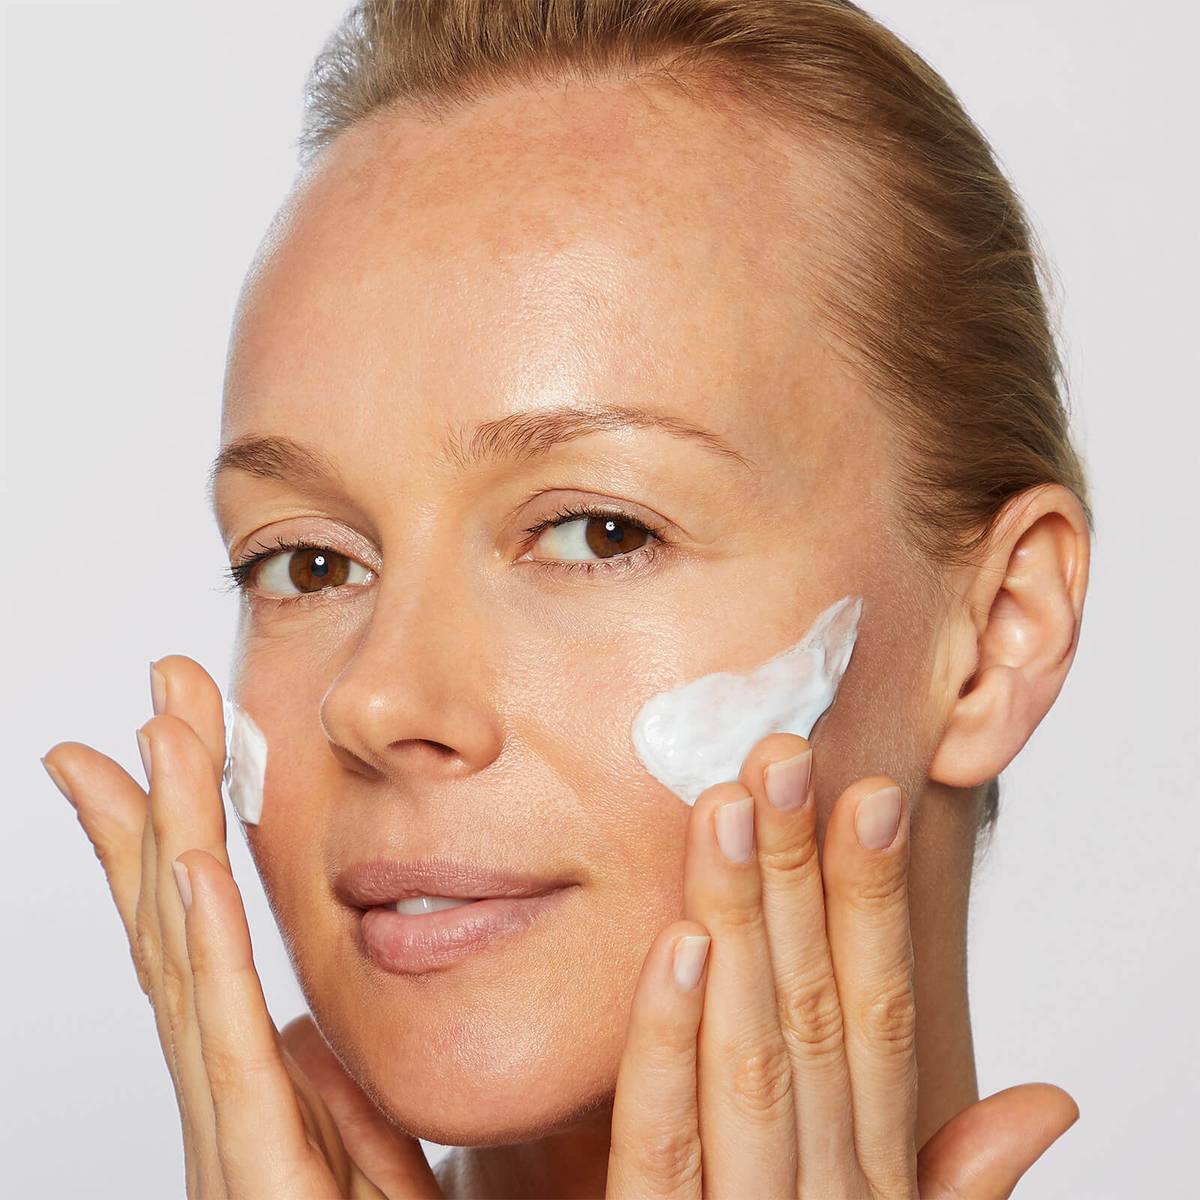 Woman applying No7 Laboratories skincare products to her face